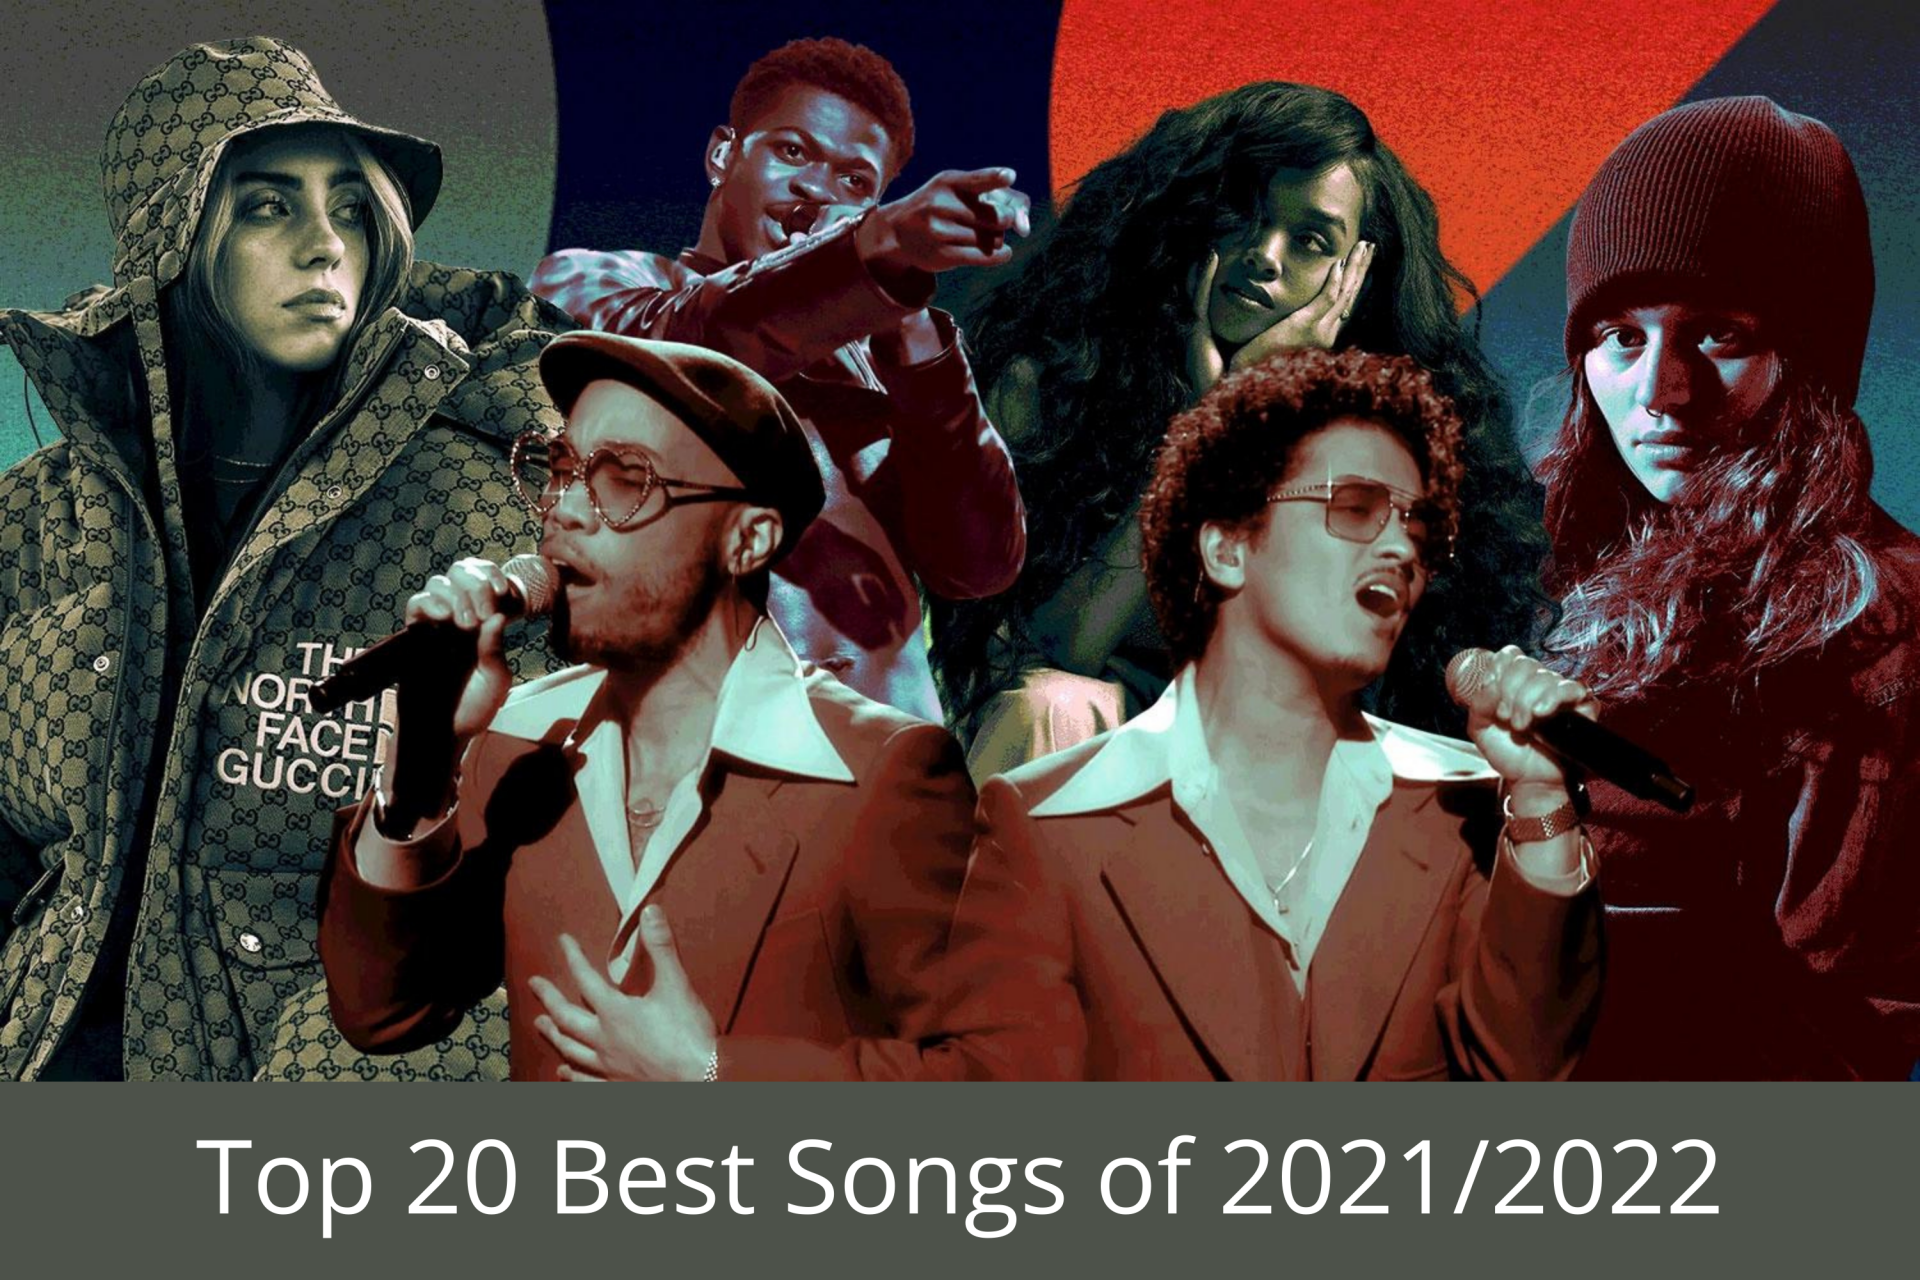 Top 20 Best & Greatest Songs in the World Right Now